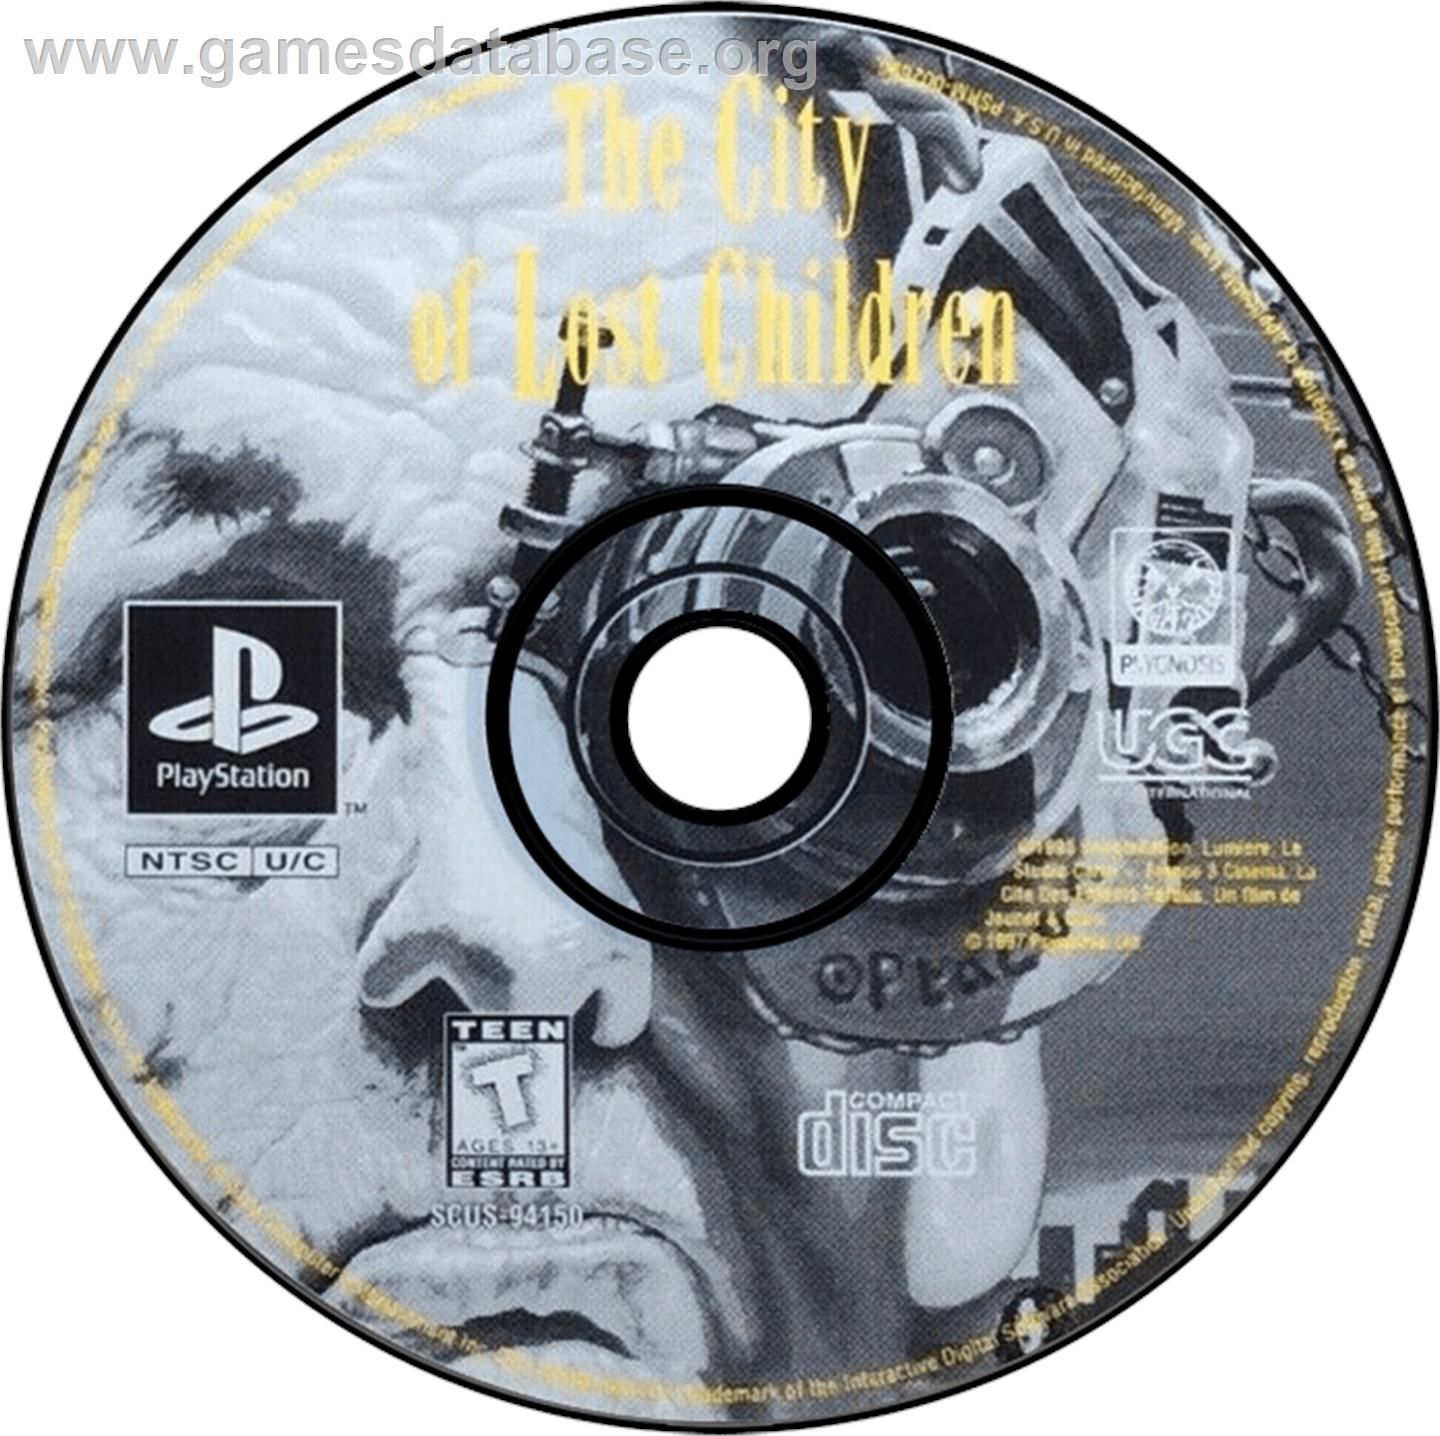 The City of Lost Children - Sony Playstation - Artwork - Disc